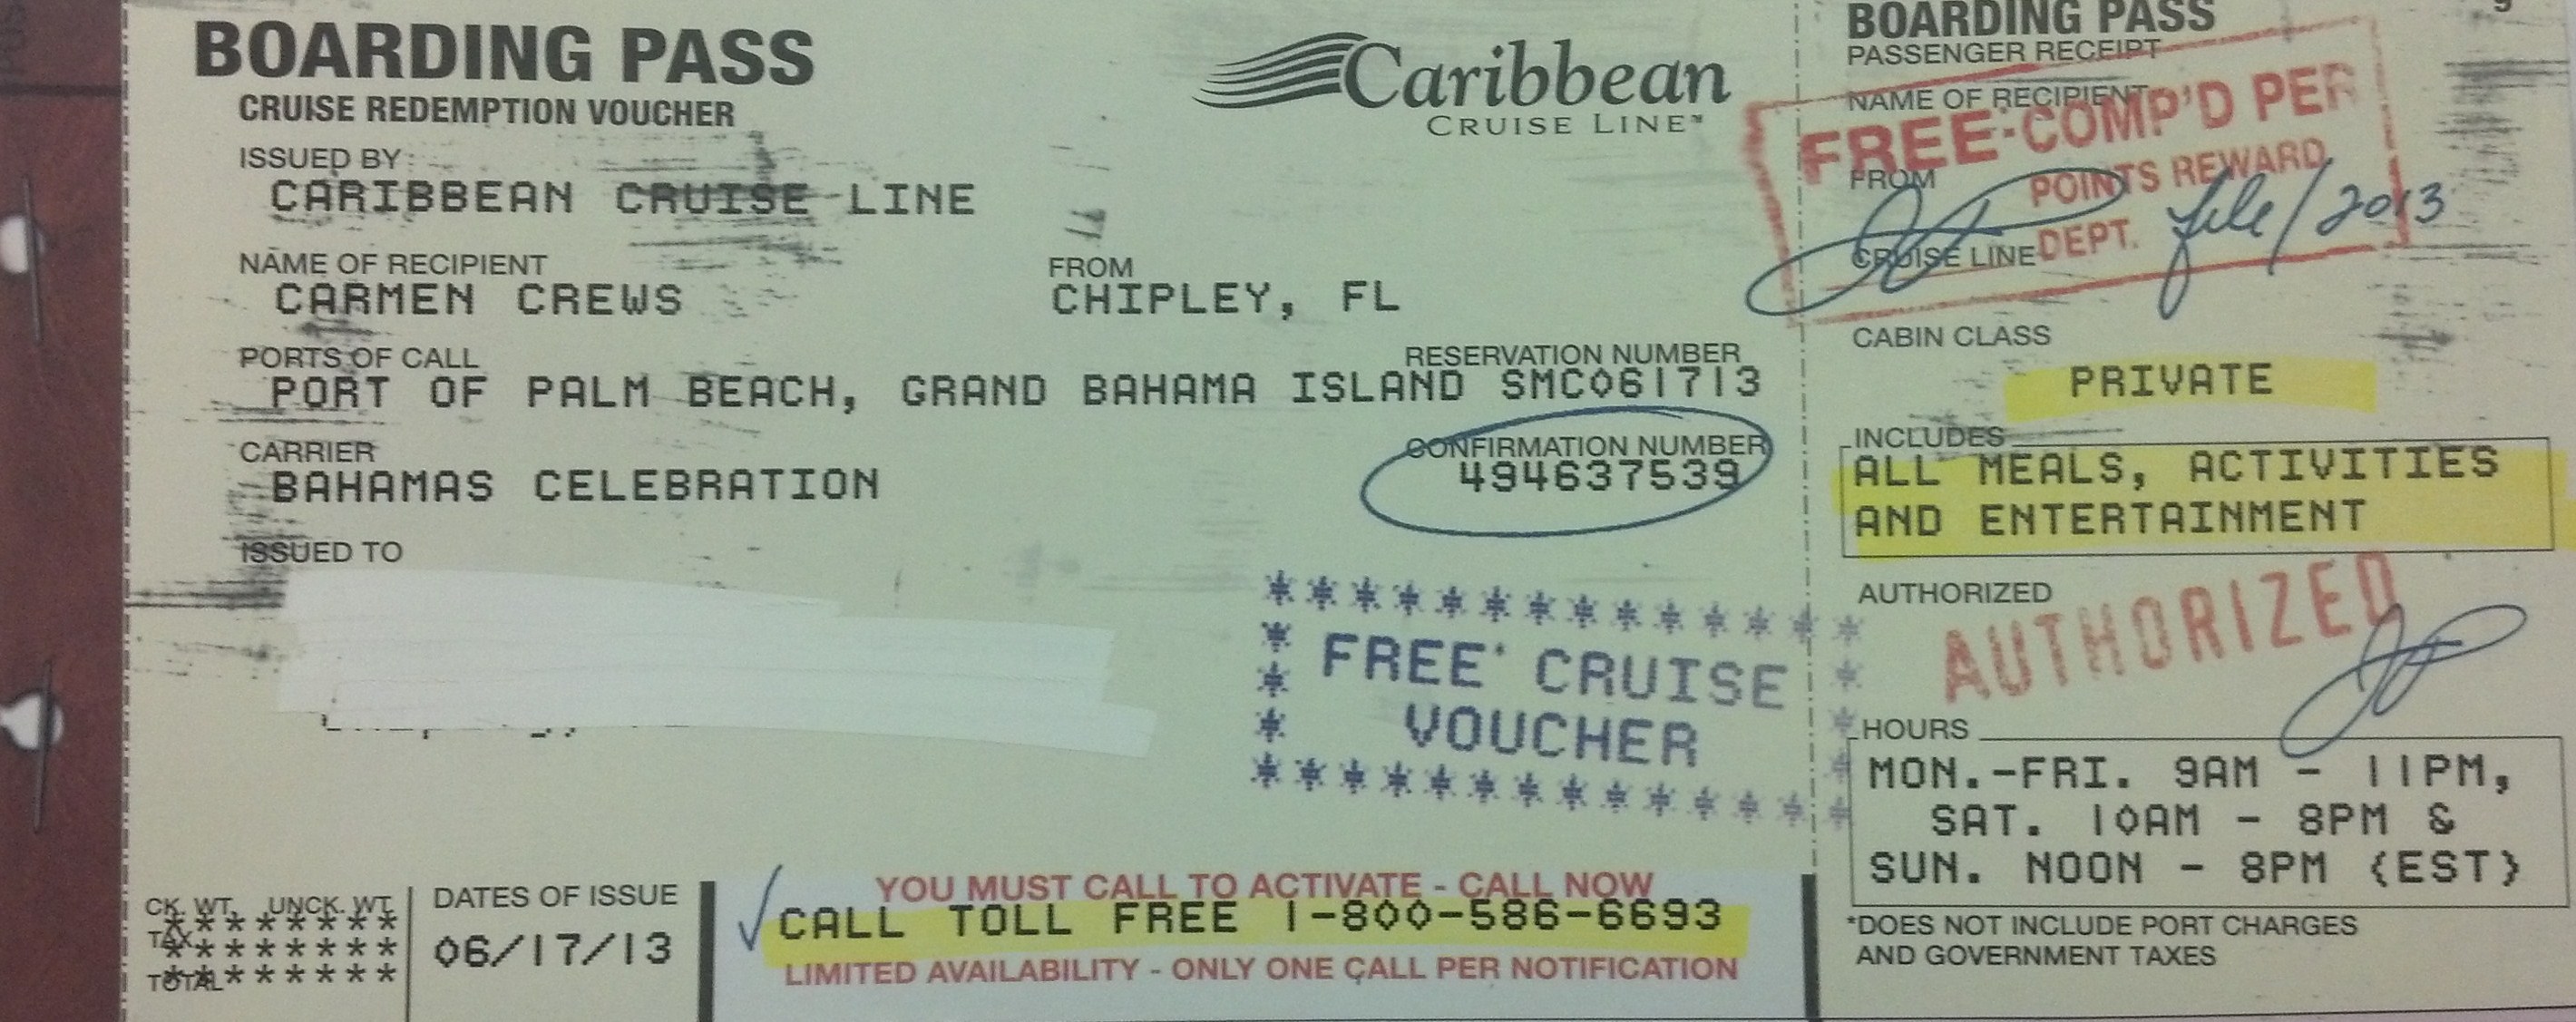 Cruise Scam The Latest To Plague The Bay County Area  WFSU